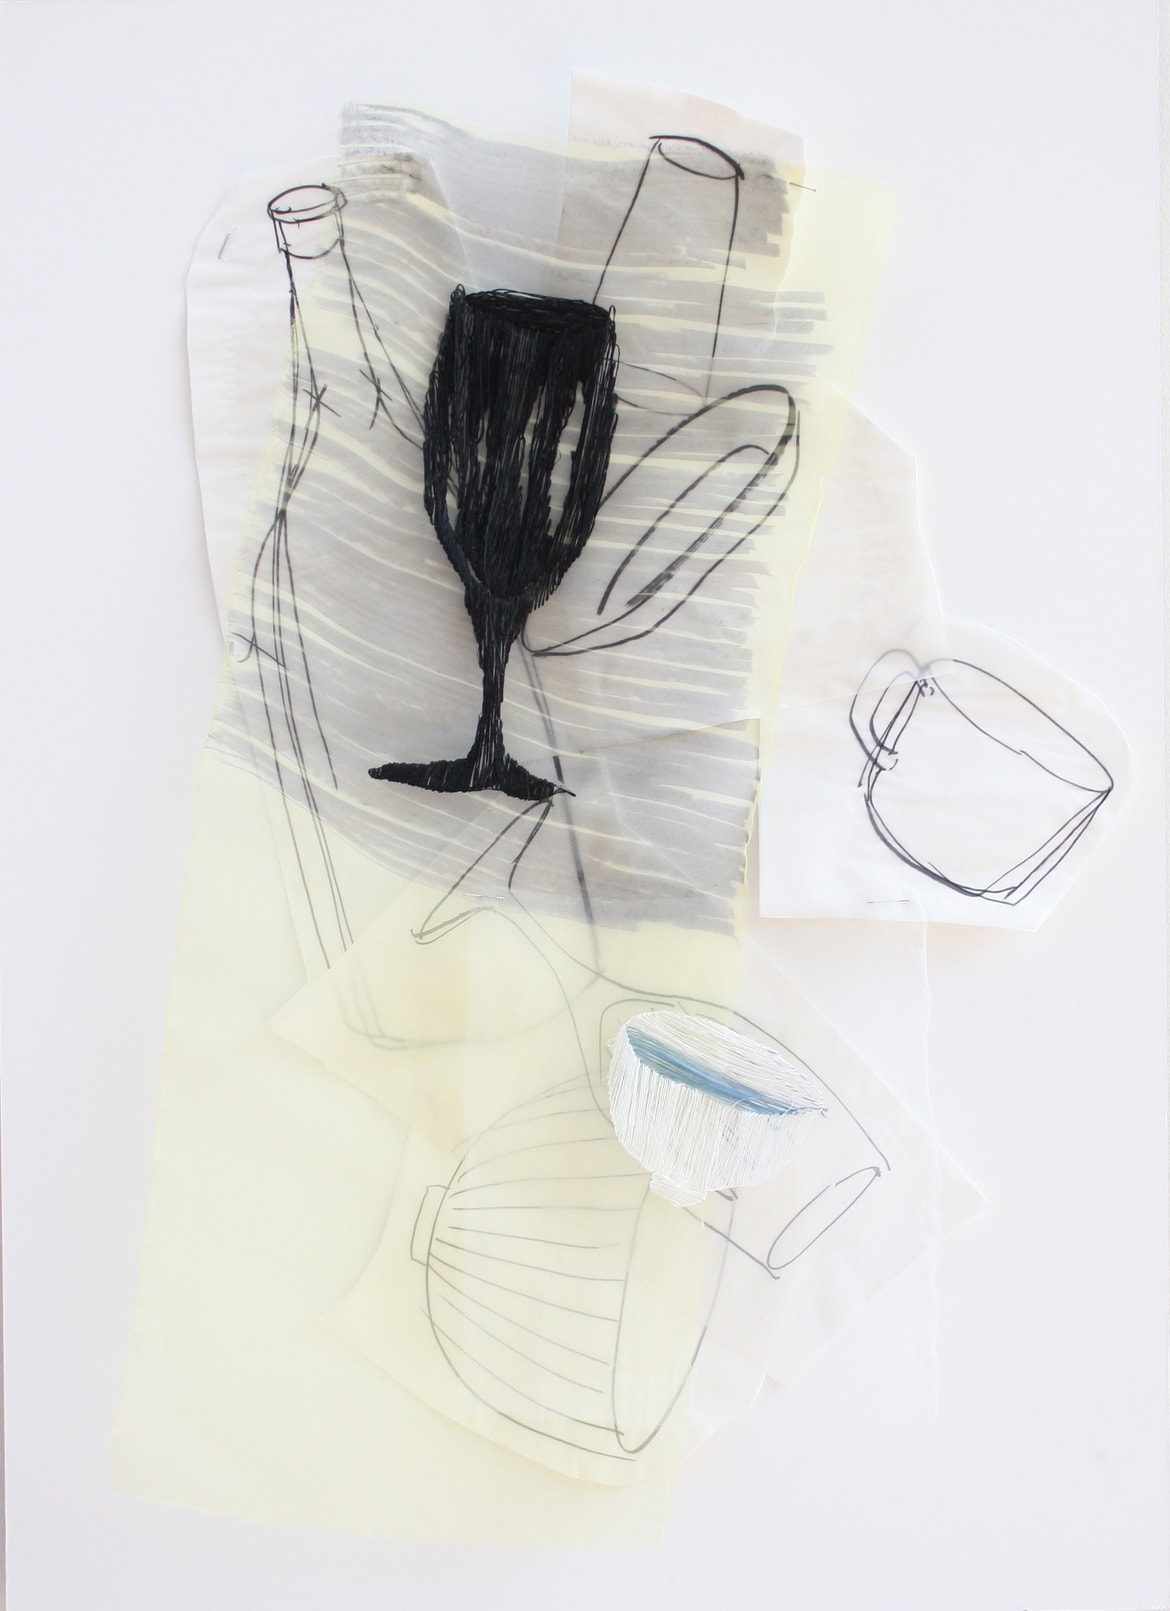 ‘The Time to Stop III’, 2014, 80 x 50 cm, Paper, drawing with permanent pen, Italian coloured synthetic cloth, Japanese silk thread